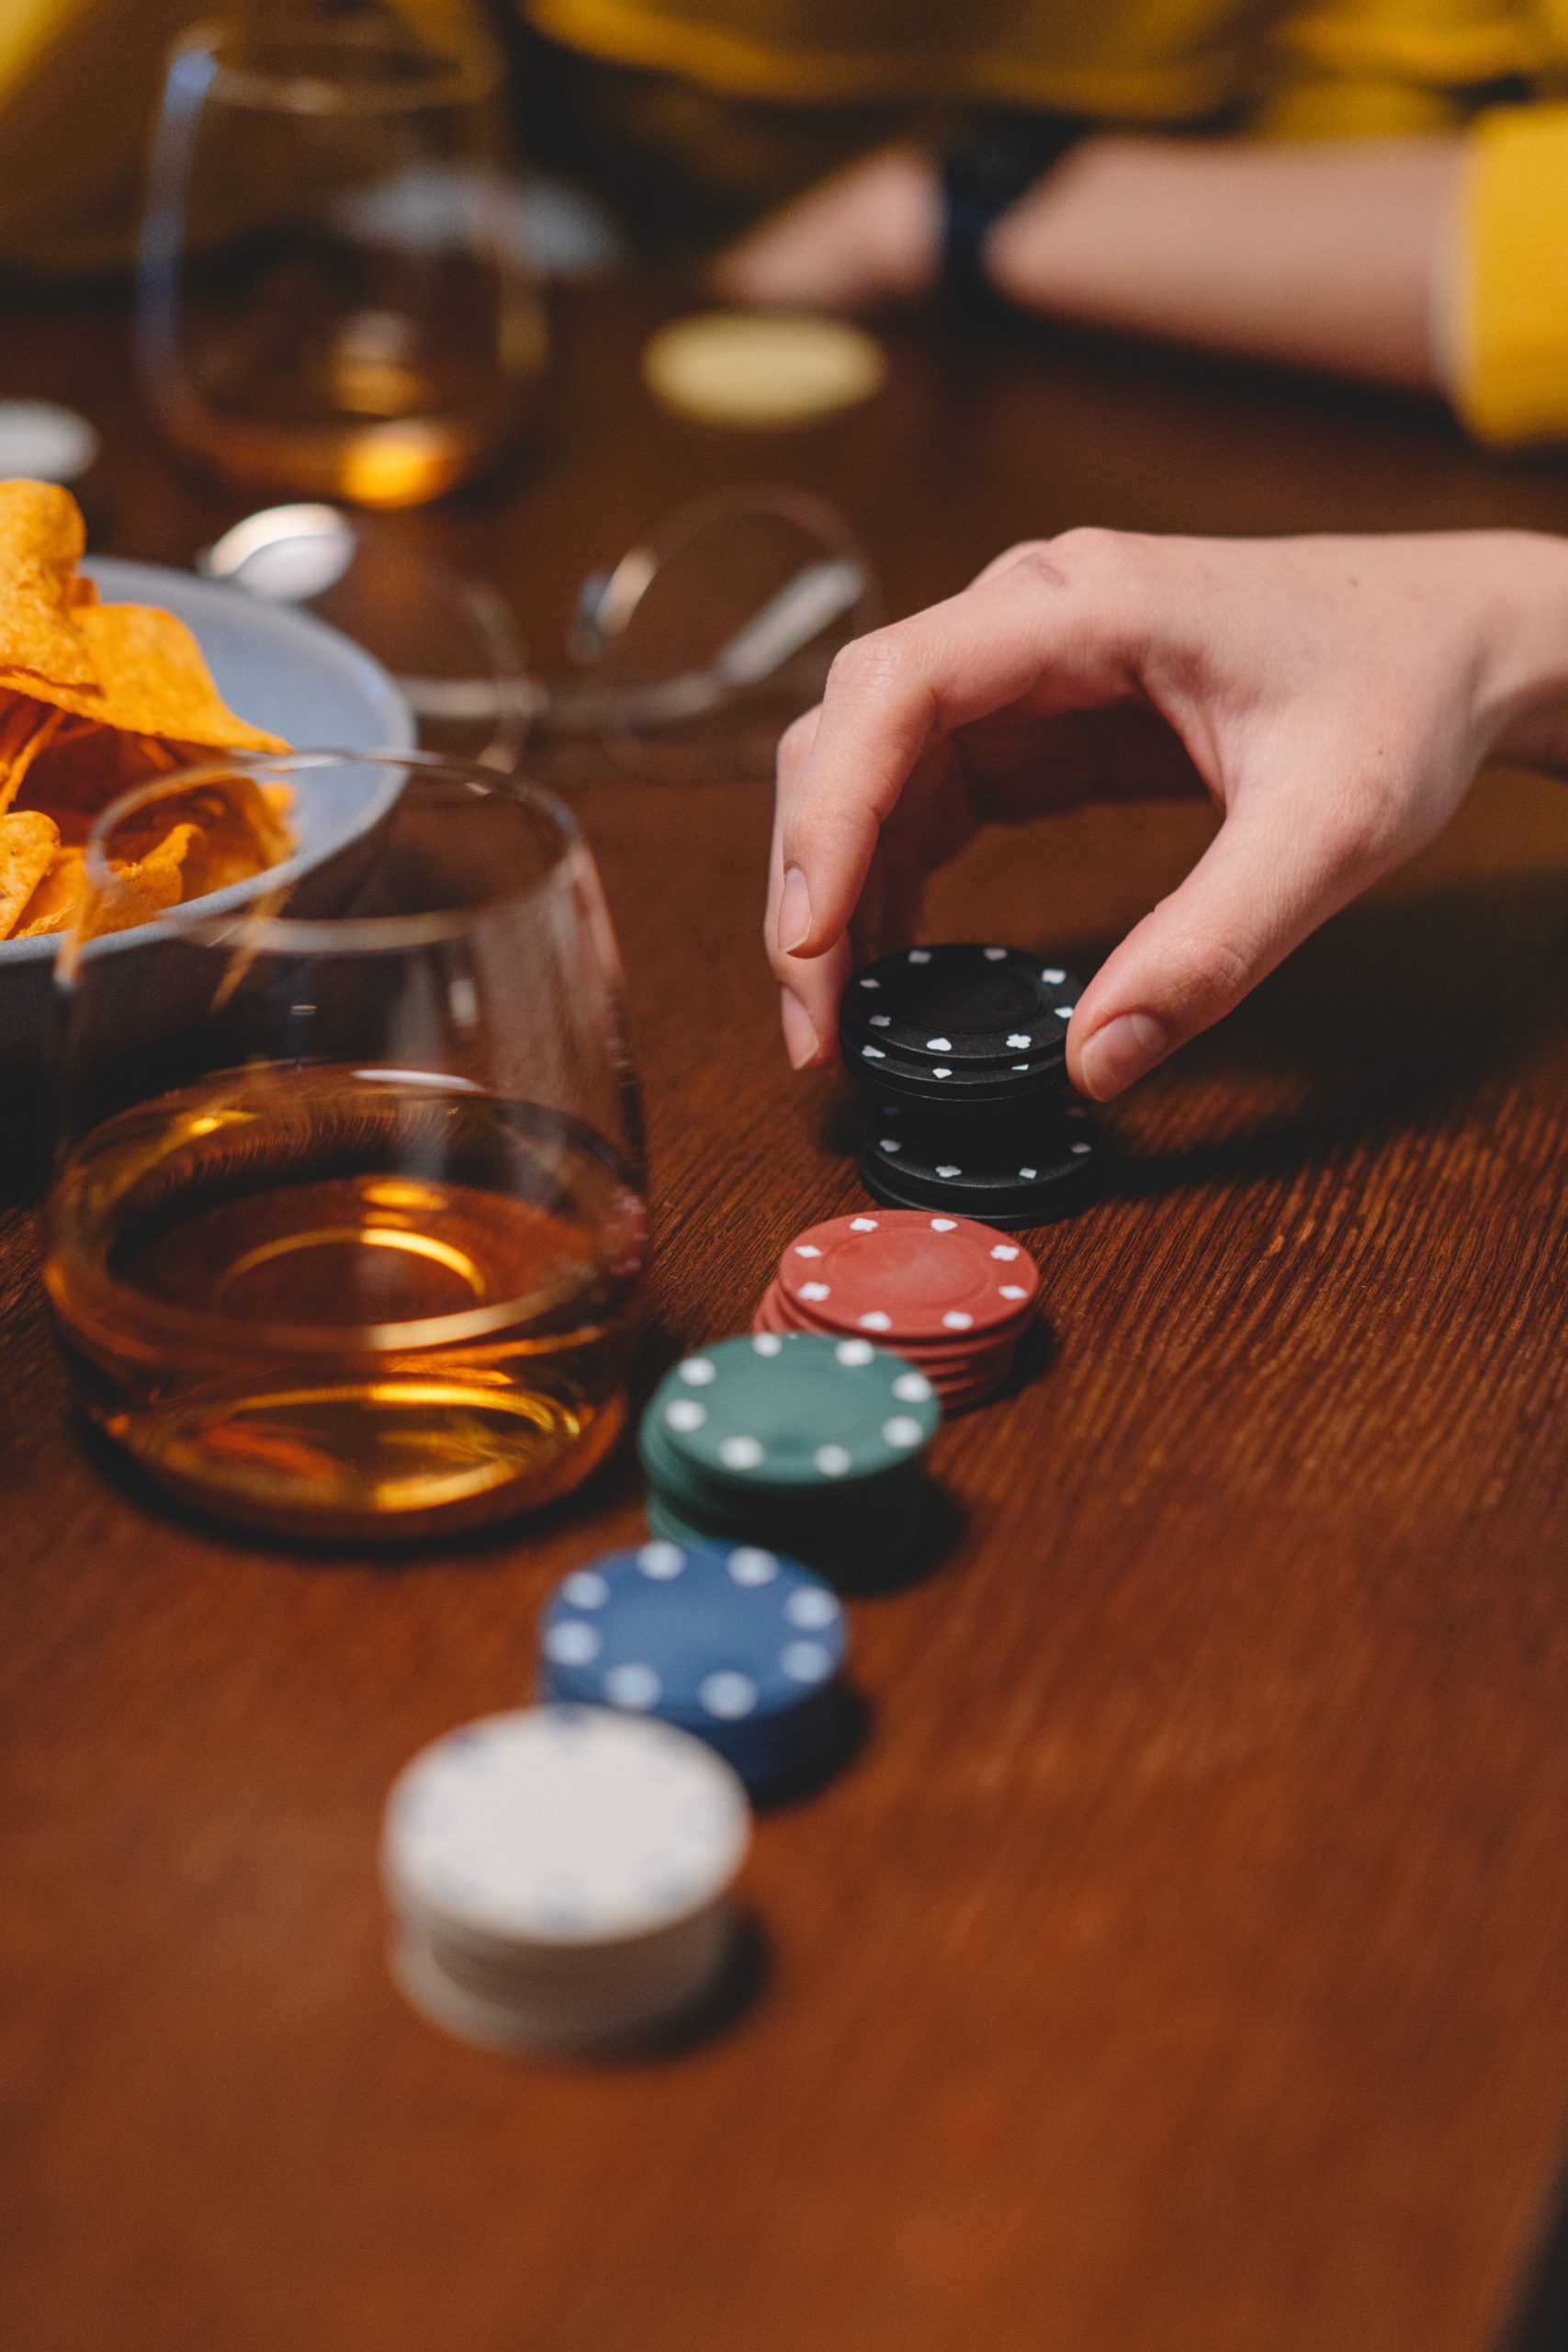 person holding poker chips, casino chips aligned in a row on a wooden table